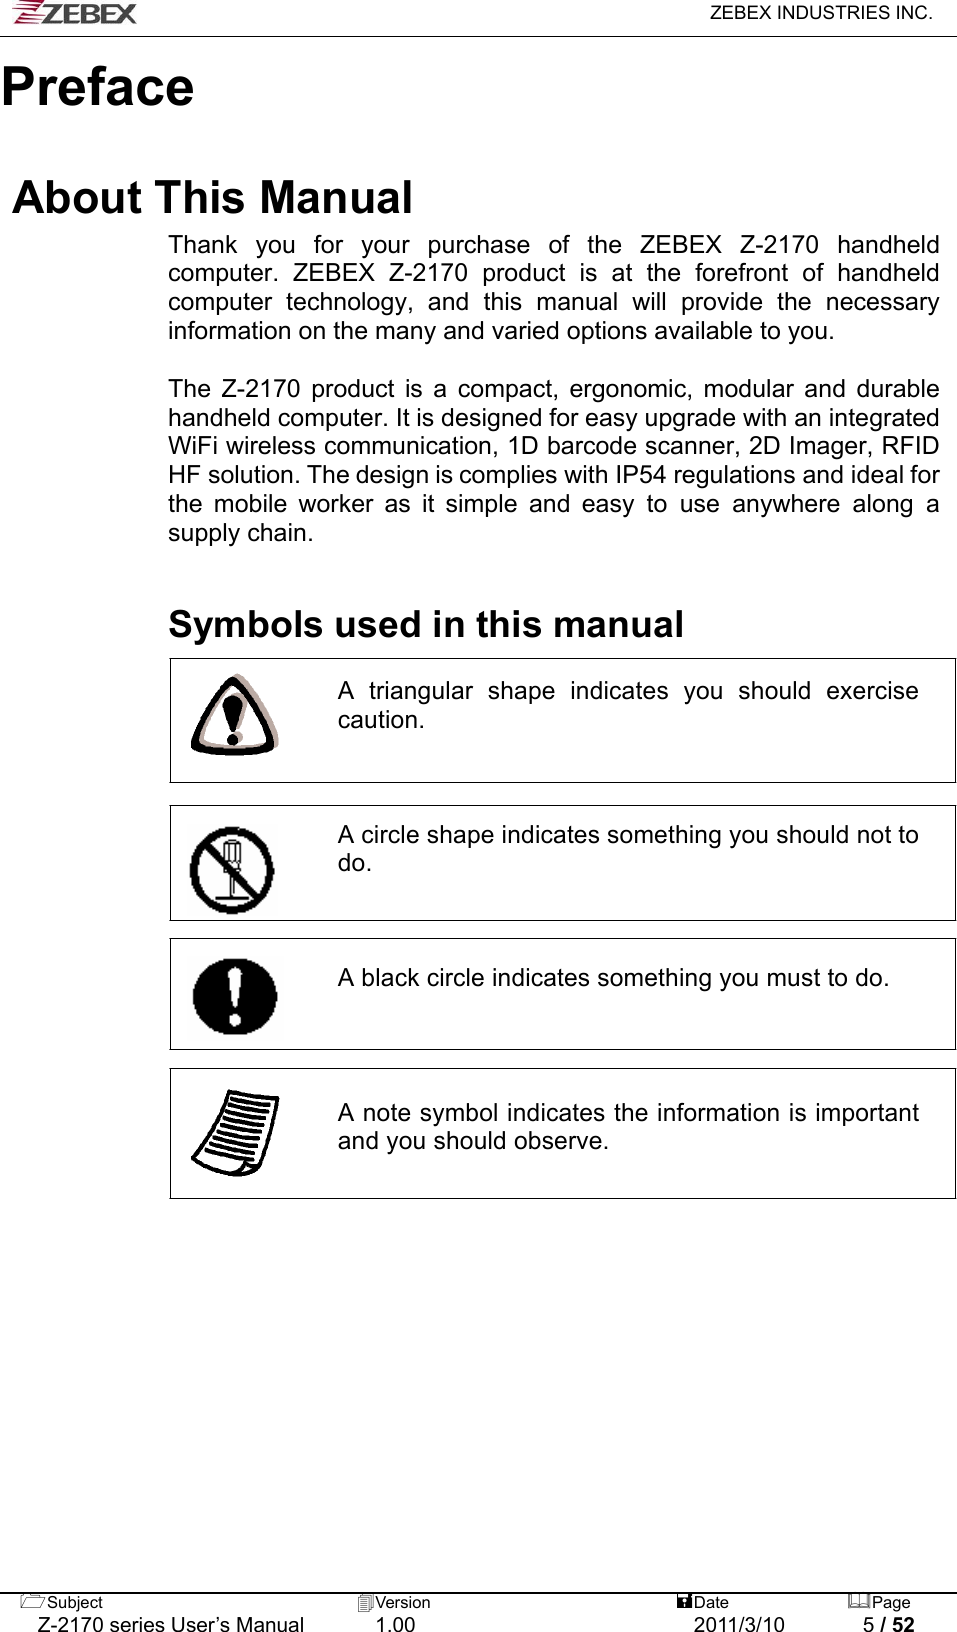   ZEBEX INDUSTRIES INC.  Subject  Version   DatePage   Z-2170 series User’s Manual  1.00  2011/3/10  5 / 52     Preface  About This Manual Thank you for your purchase of the ZEBEX Z-2170 handheld computer. ZEBEX Z-2170 product is at the forefront of handheld computer technology, and this manual will provide the necessary information on the many and varied options available to you.  The Z-2170 product is a compact, ergonomic, modular and durable handheld computer. It is designed for easy upgrade with an integrated WiFi wireless communication, 1D barcode scanner, 2D Imager, RFID HF solution. The design is complies with IP54 regulations and ideal for the mobile worker as it simple and easy to use anywhere along a supply chain.    Symbols used in this manual  A triangular shape indicates you should exercise caution.     A circle shape indicates something you should not to do.     A black circle indicates something you must to do.      A note symbol indicates the information is important and you should observe.                    